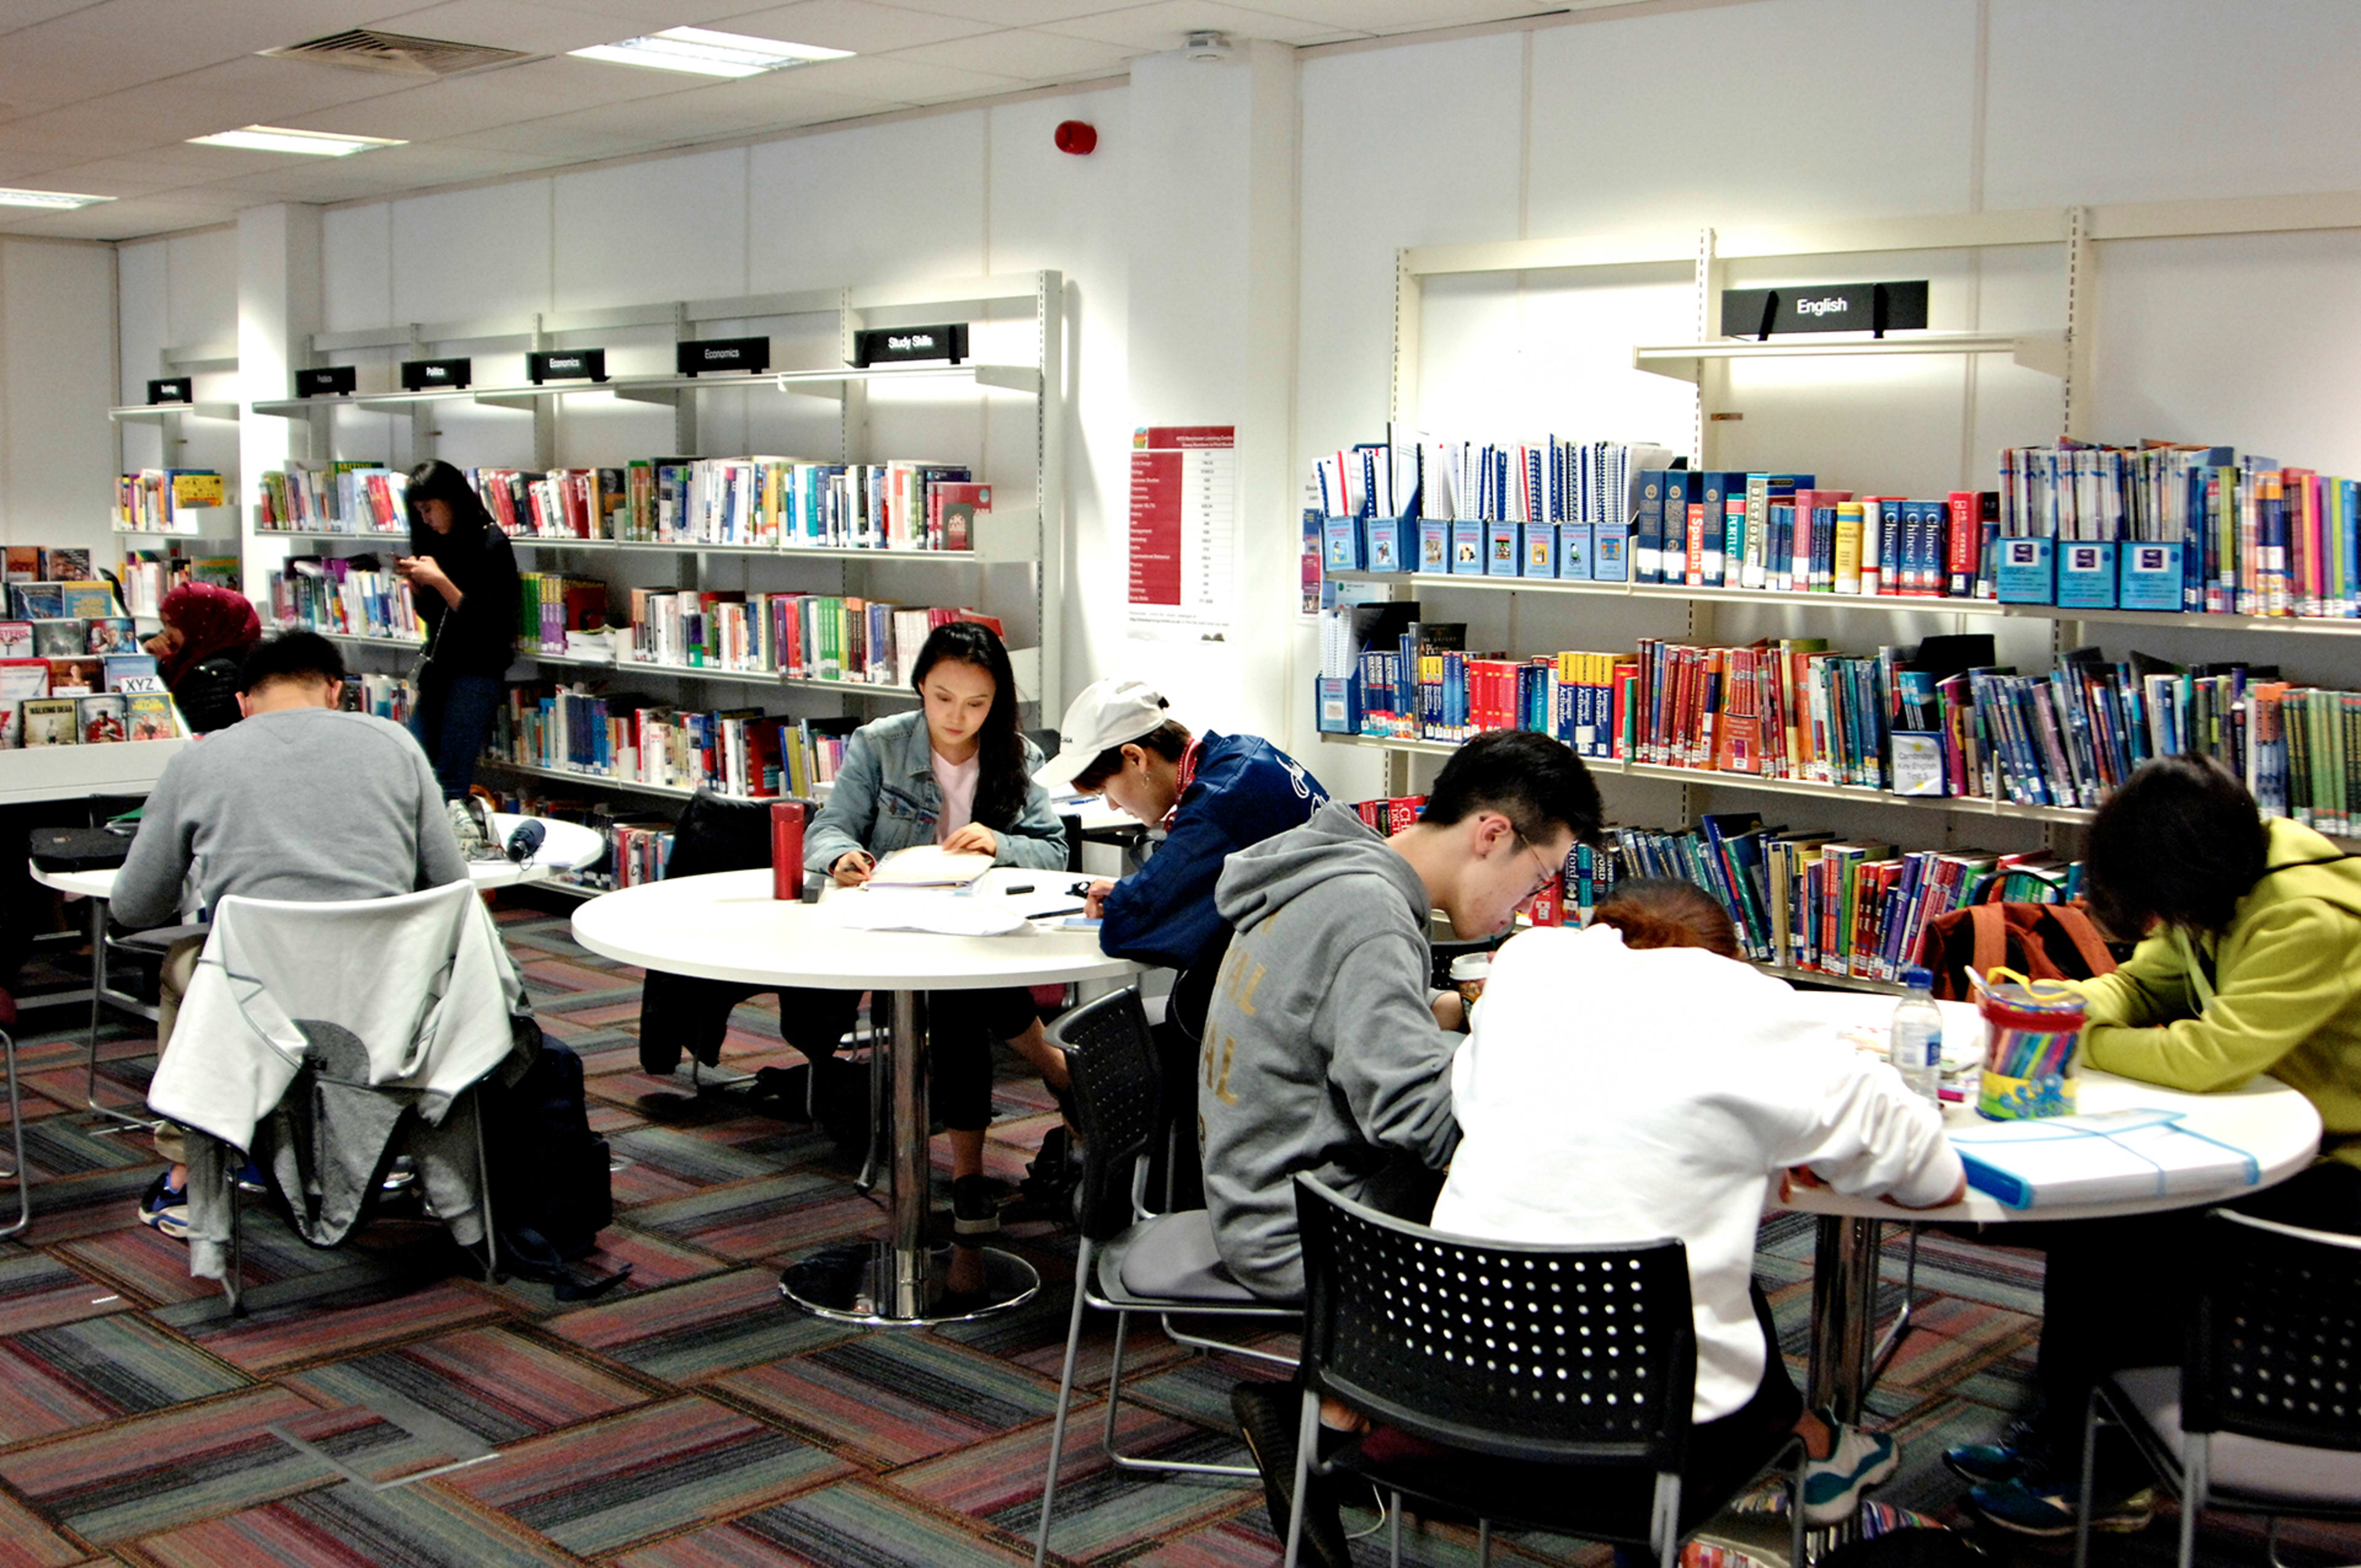 International students using the Learning Resource Center